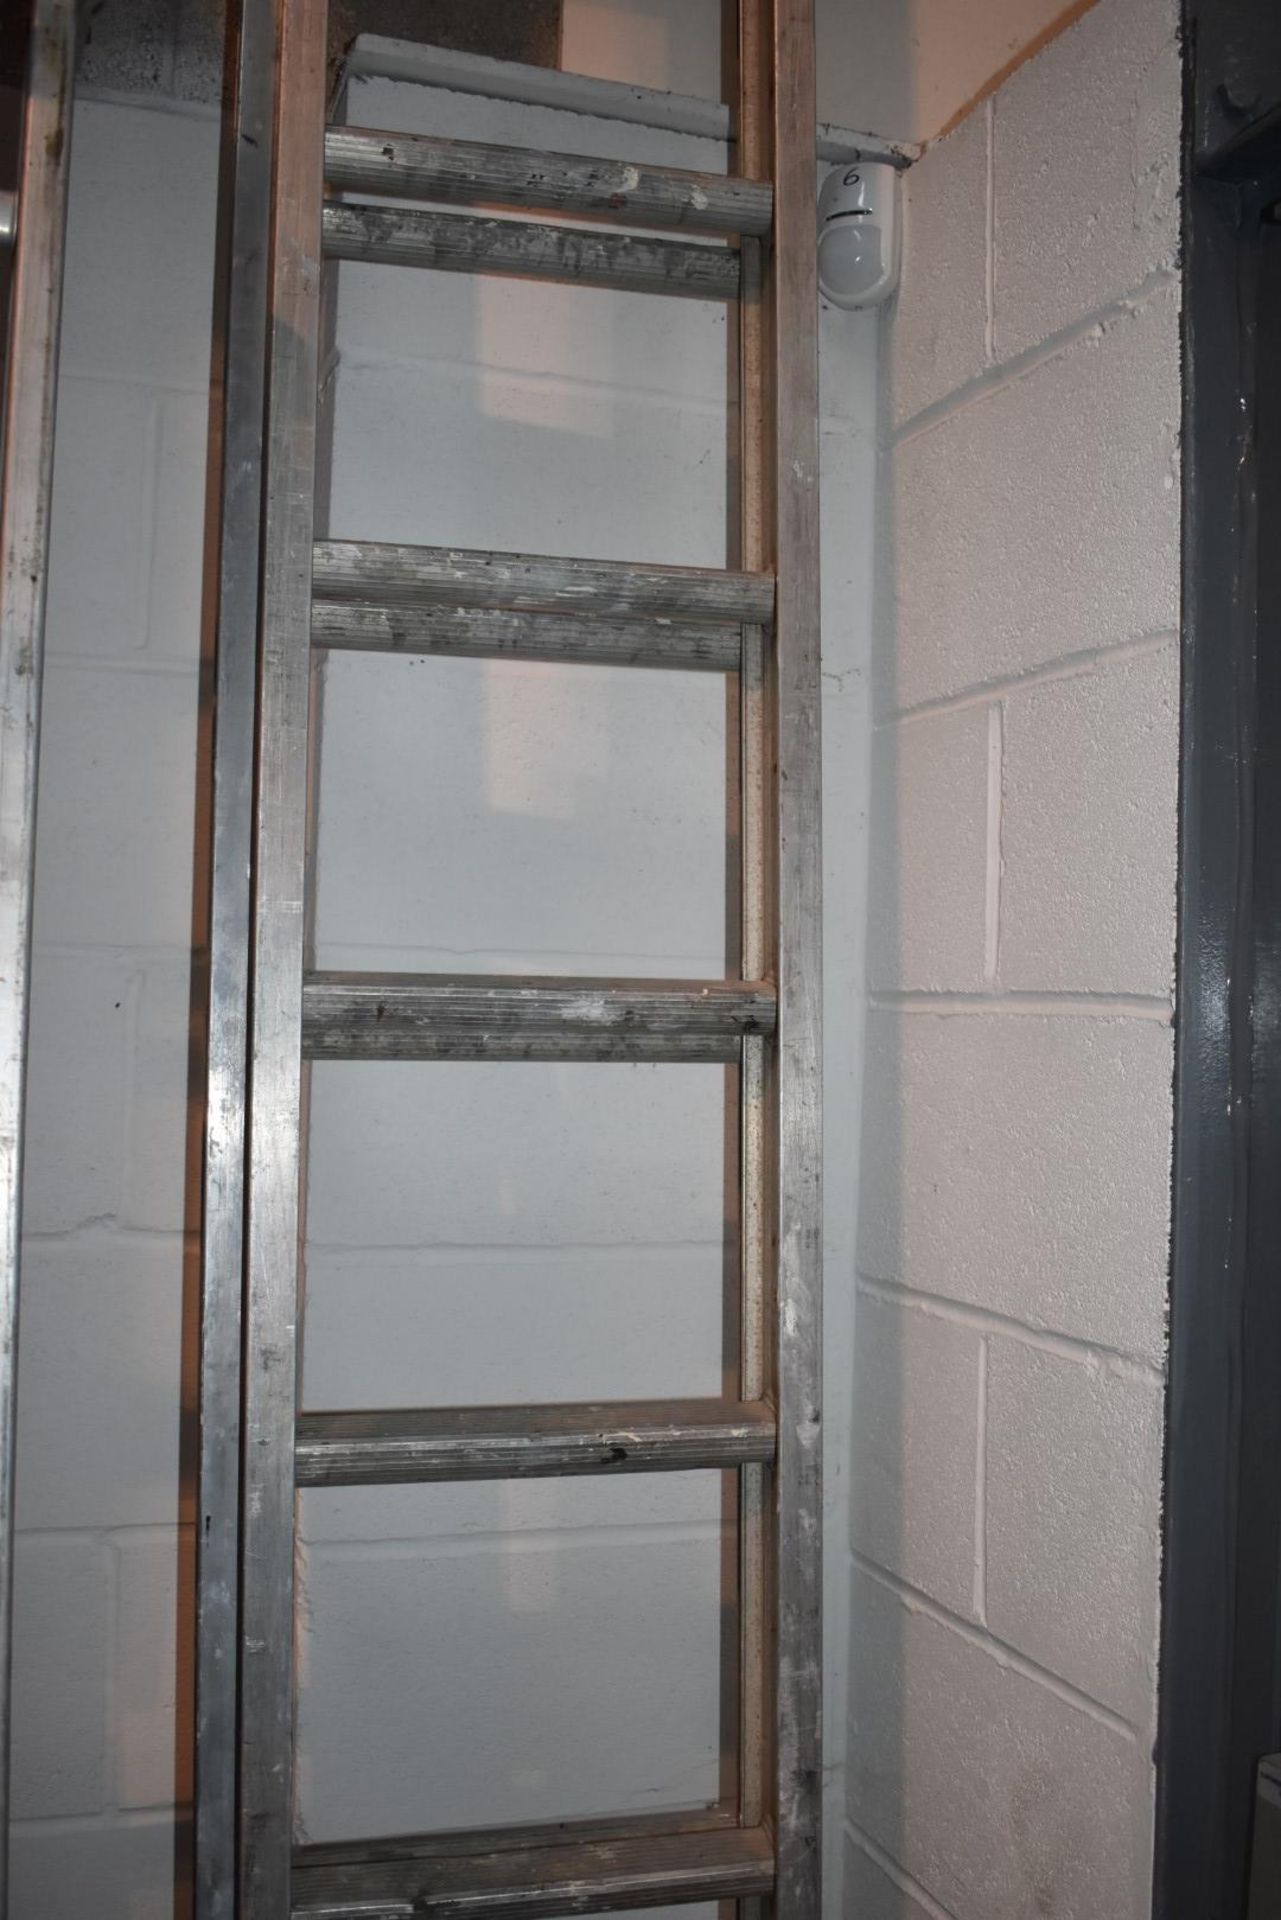 1 x Set of Clima Two Section Ladders - Size 16',3" Closed x 29',3" Open - Ref 418 - CL501 - - Image 6 of 7